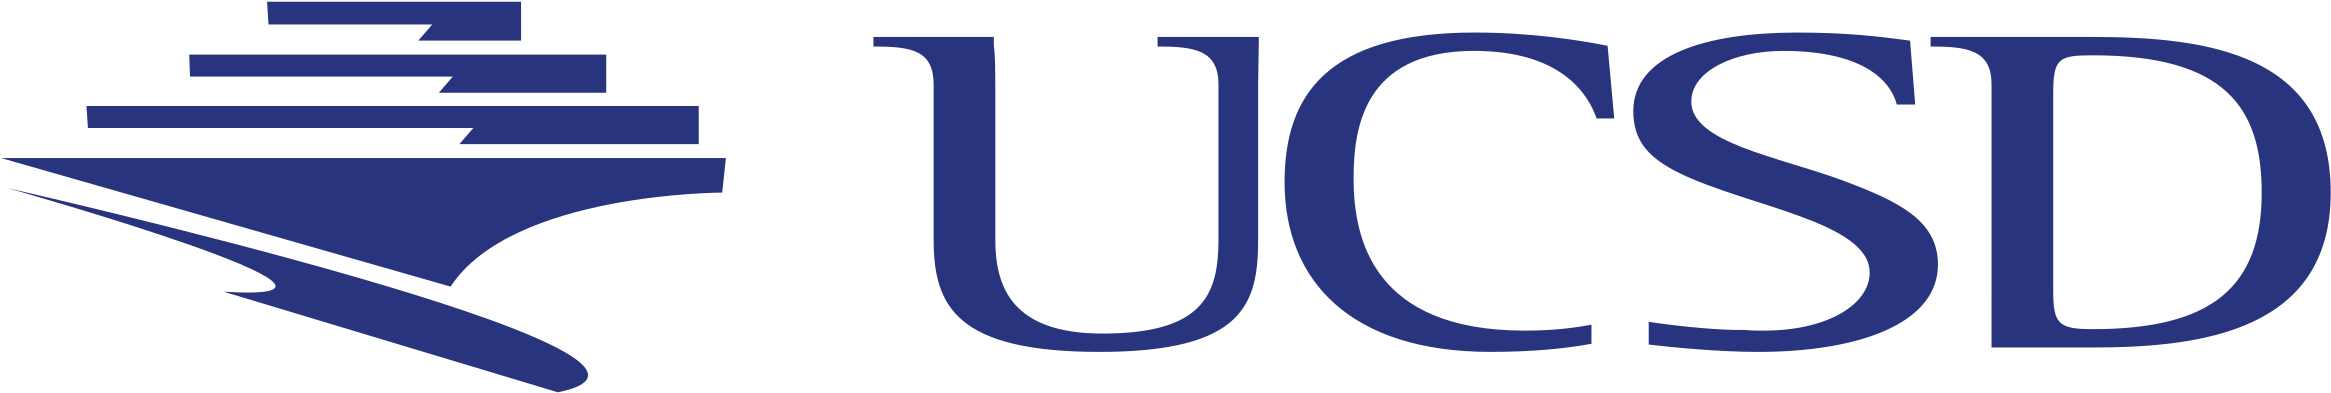 Ucsd Official Logo